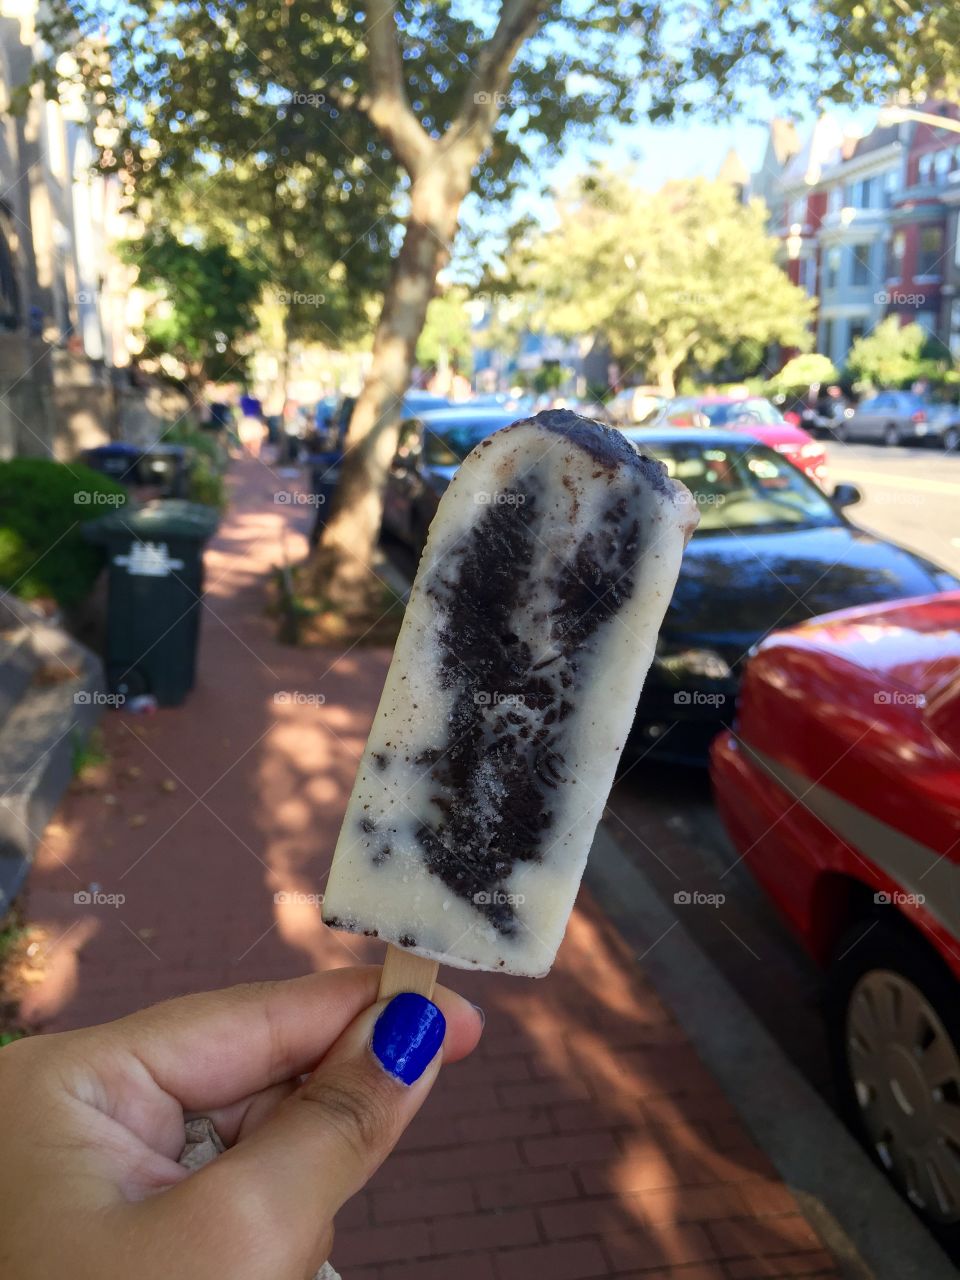 Cookies and Cream Pop. Cookies and Cream Popsicle from Pleasant Pops in Washington, DC. 